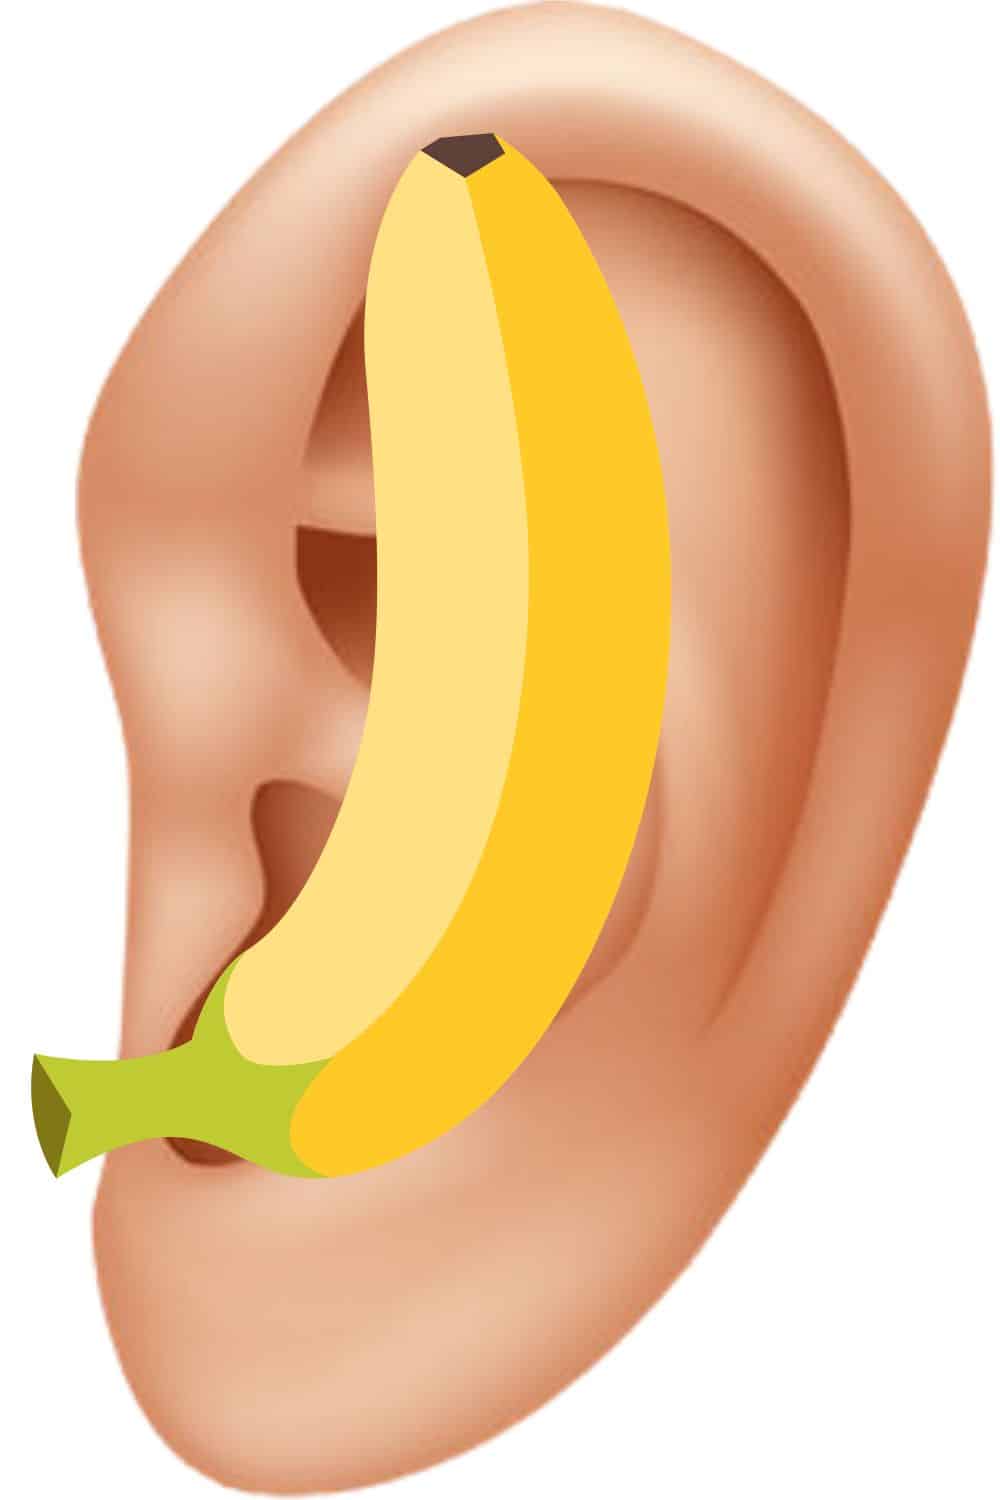 Should I Get A Hearing Test 10 Top Warning Signs To Act On - I got a banana in my ear 